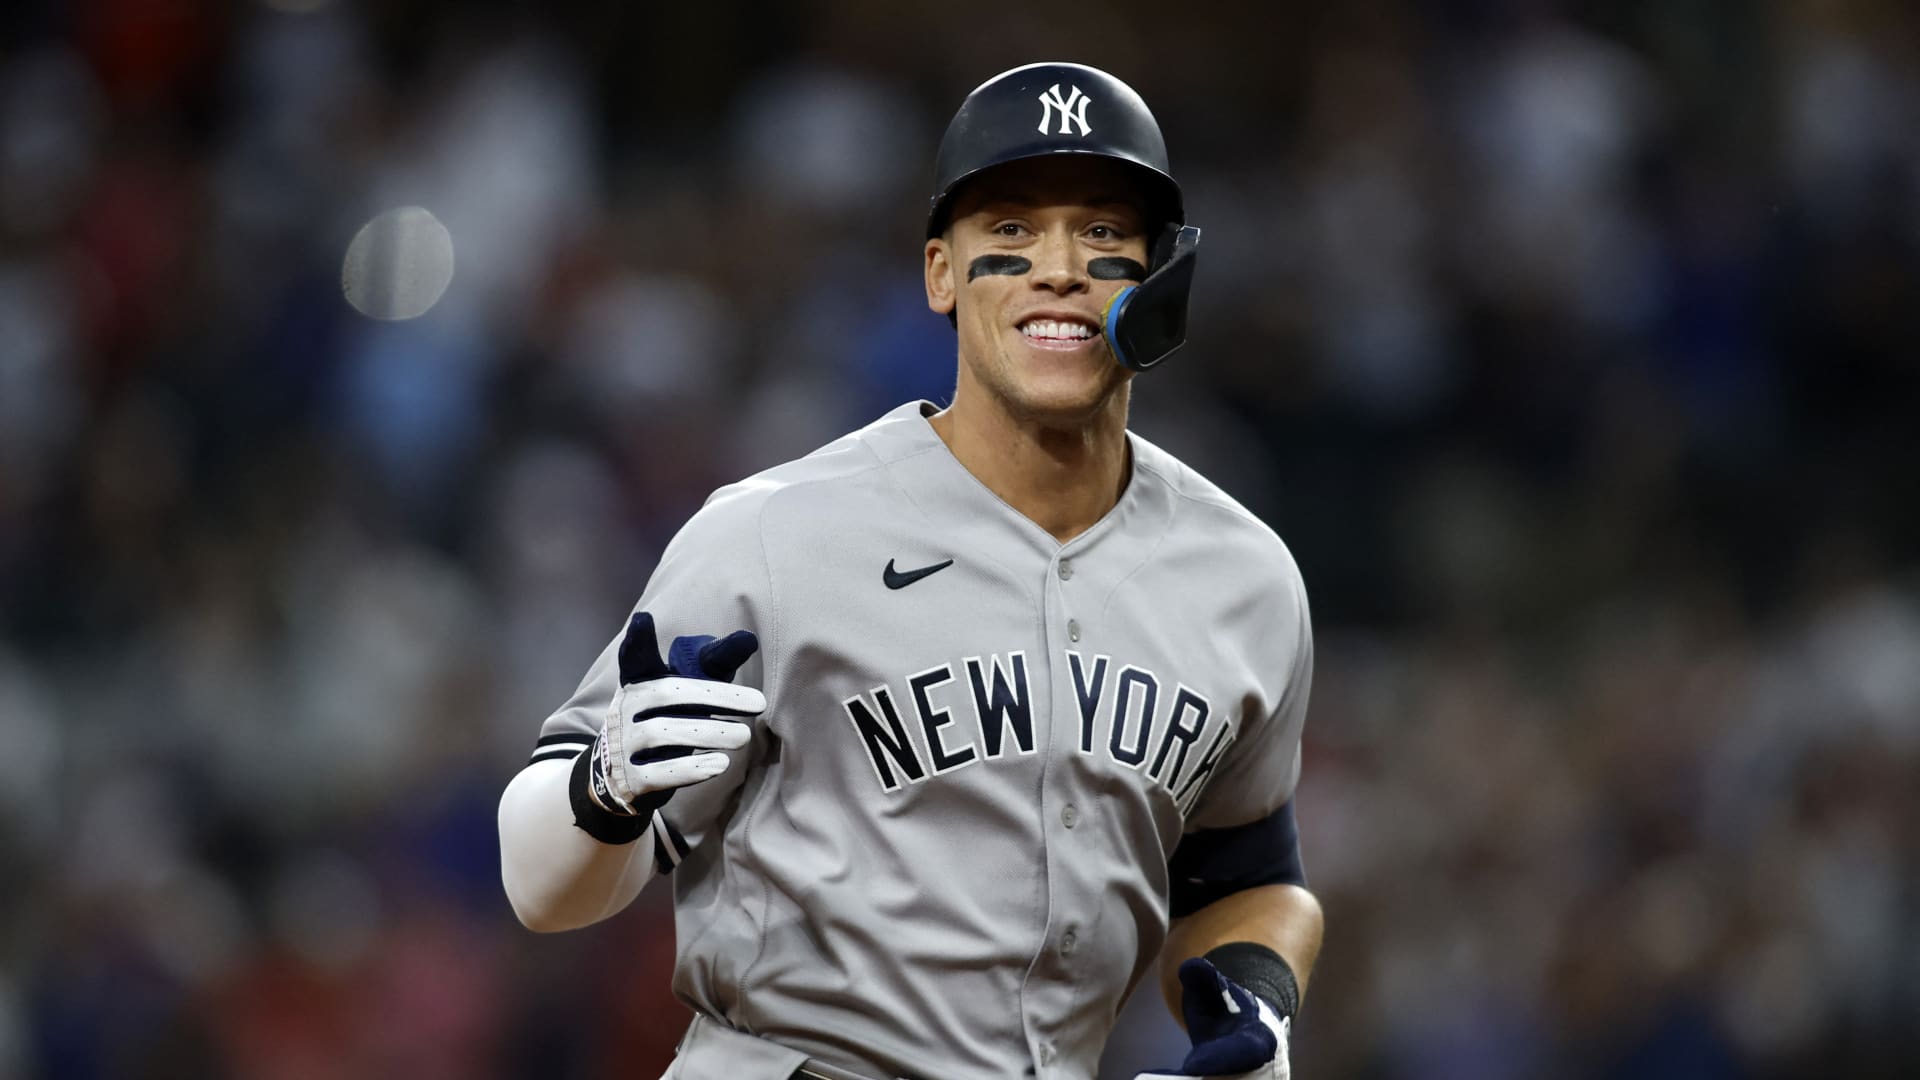 New York Yankees right fielder Aaron Judge (99) rounds the bases after hitting home run number sixty-two to break the American League home run record in the first inning against the Texas Rangers at Globe Life Field.